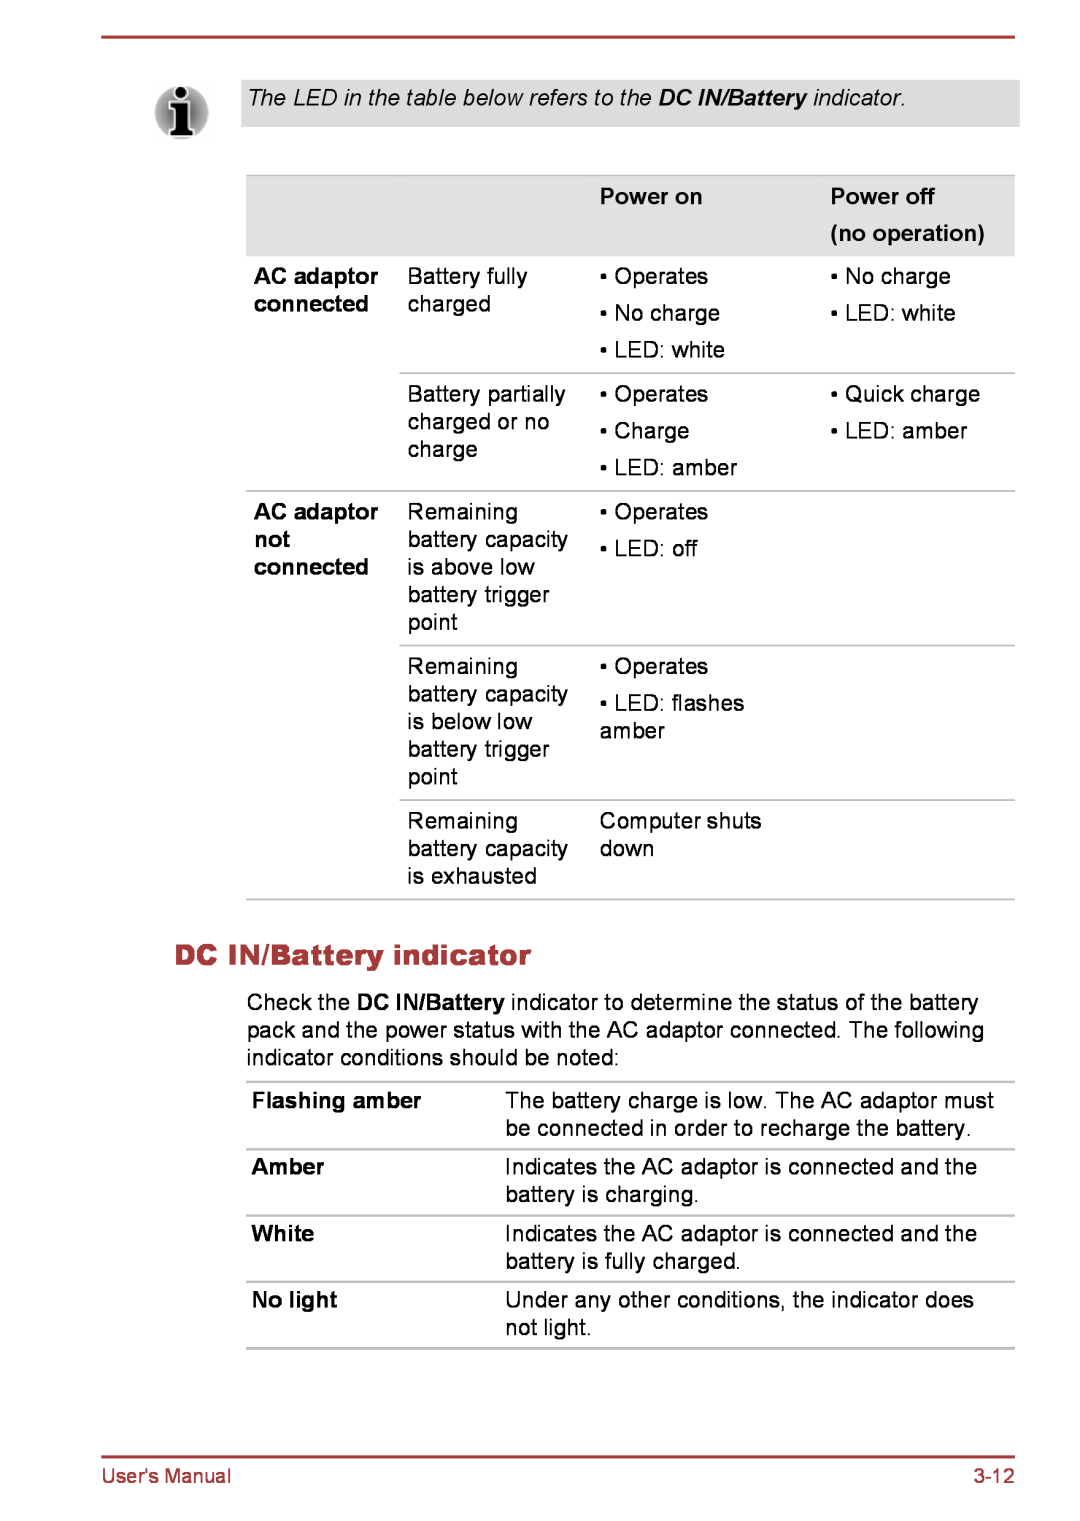 Toshiba L35W-B, L30W-B user manual The LED in the table below refers to the DC IN/Battery indicator 